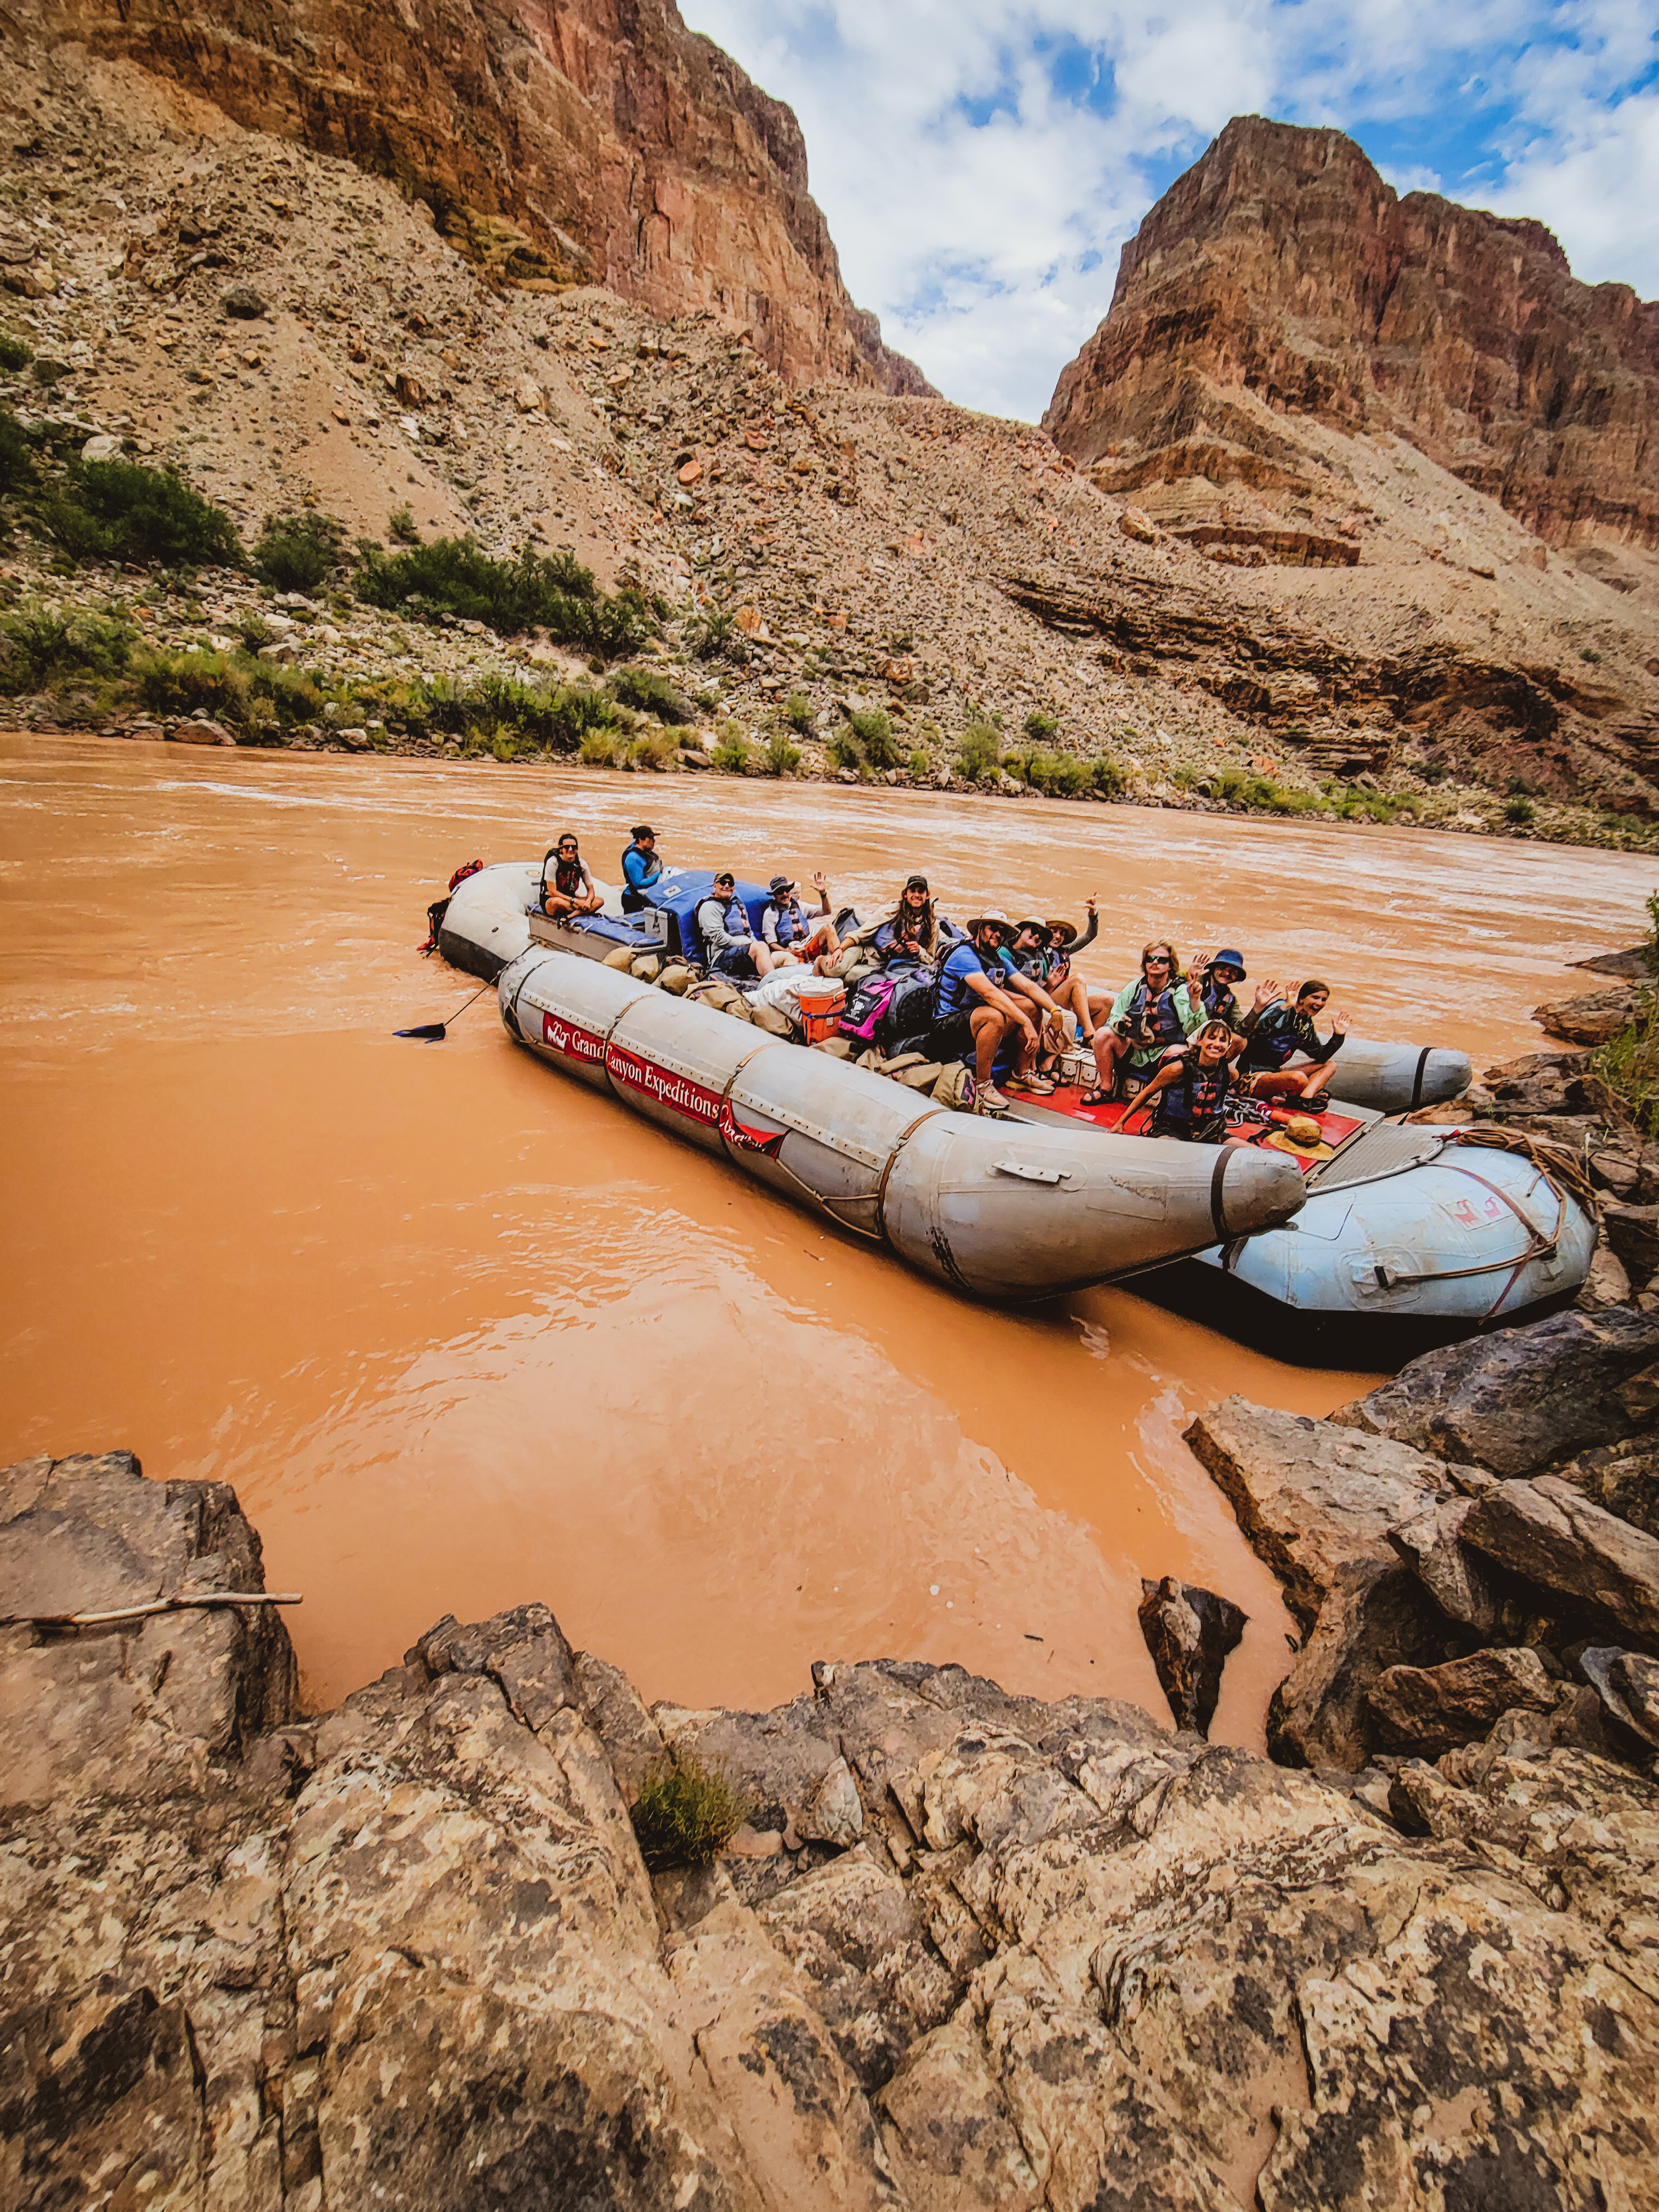 a group of students on a motor boat in the Grand Canyon